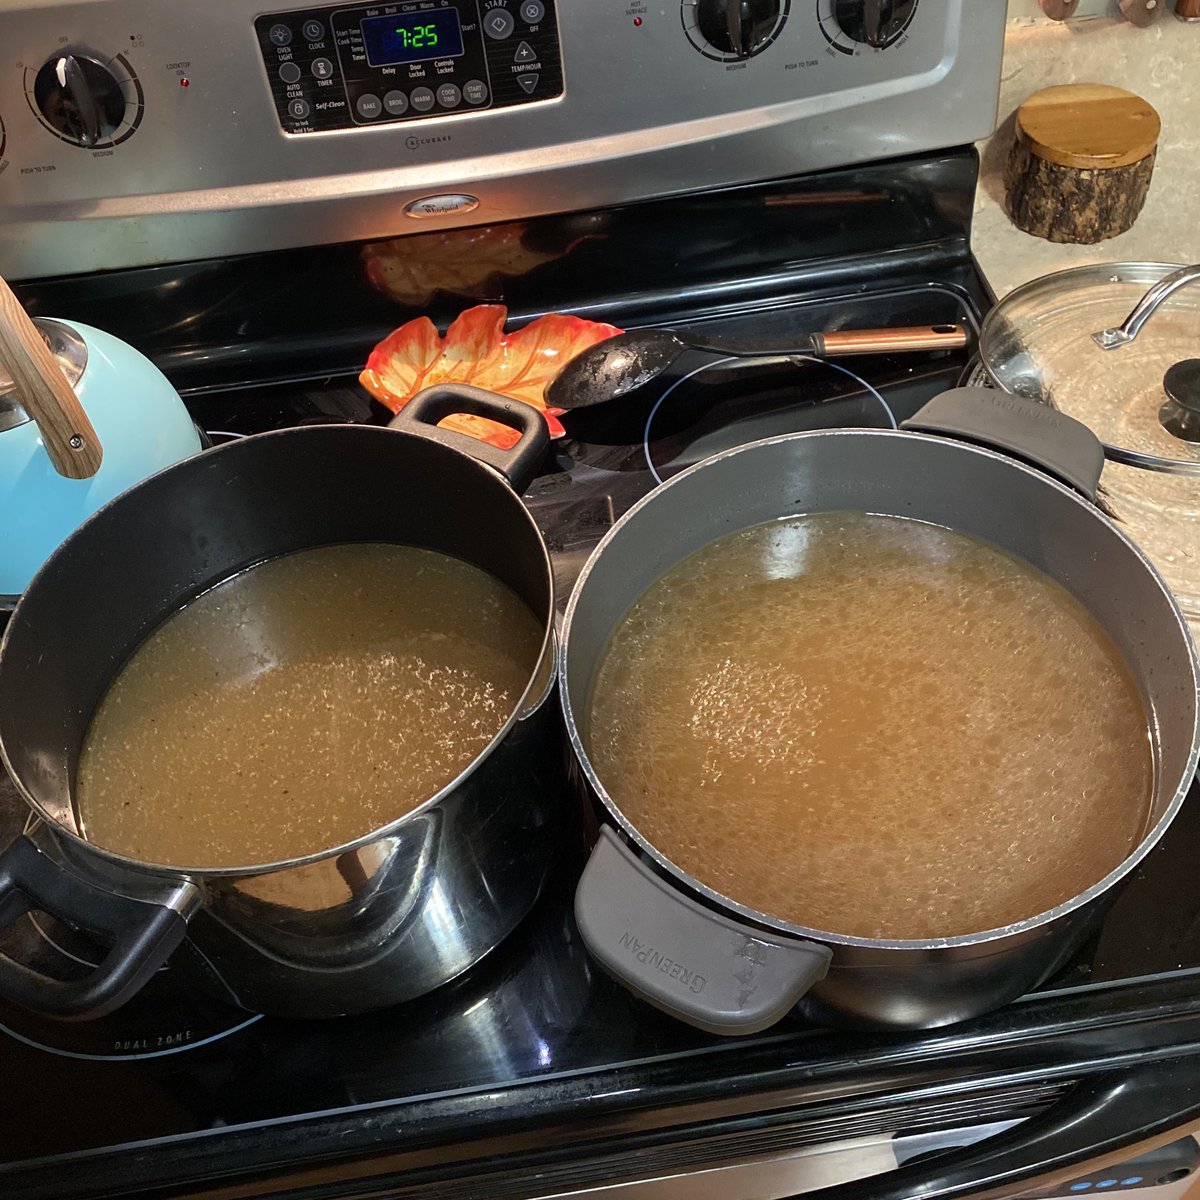 Time for more beef bone broth! I’m just waiting for it to cool enough to bag up and freeze! My freezer has plenty of chicken bone broth but I ran out of beef! The next batch I make will be Turkey bone broth! 

#Carnivore #carnivorediet #keto #ketodiet #bonebroth